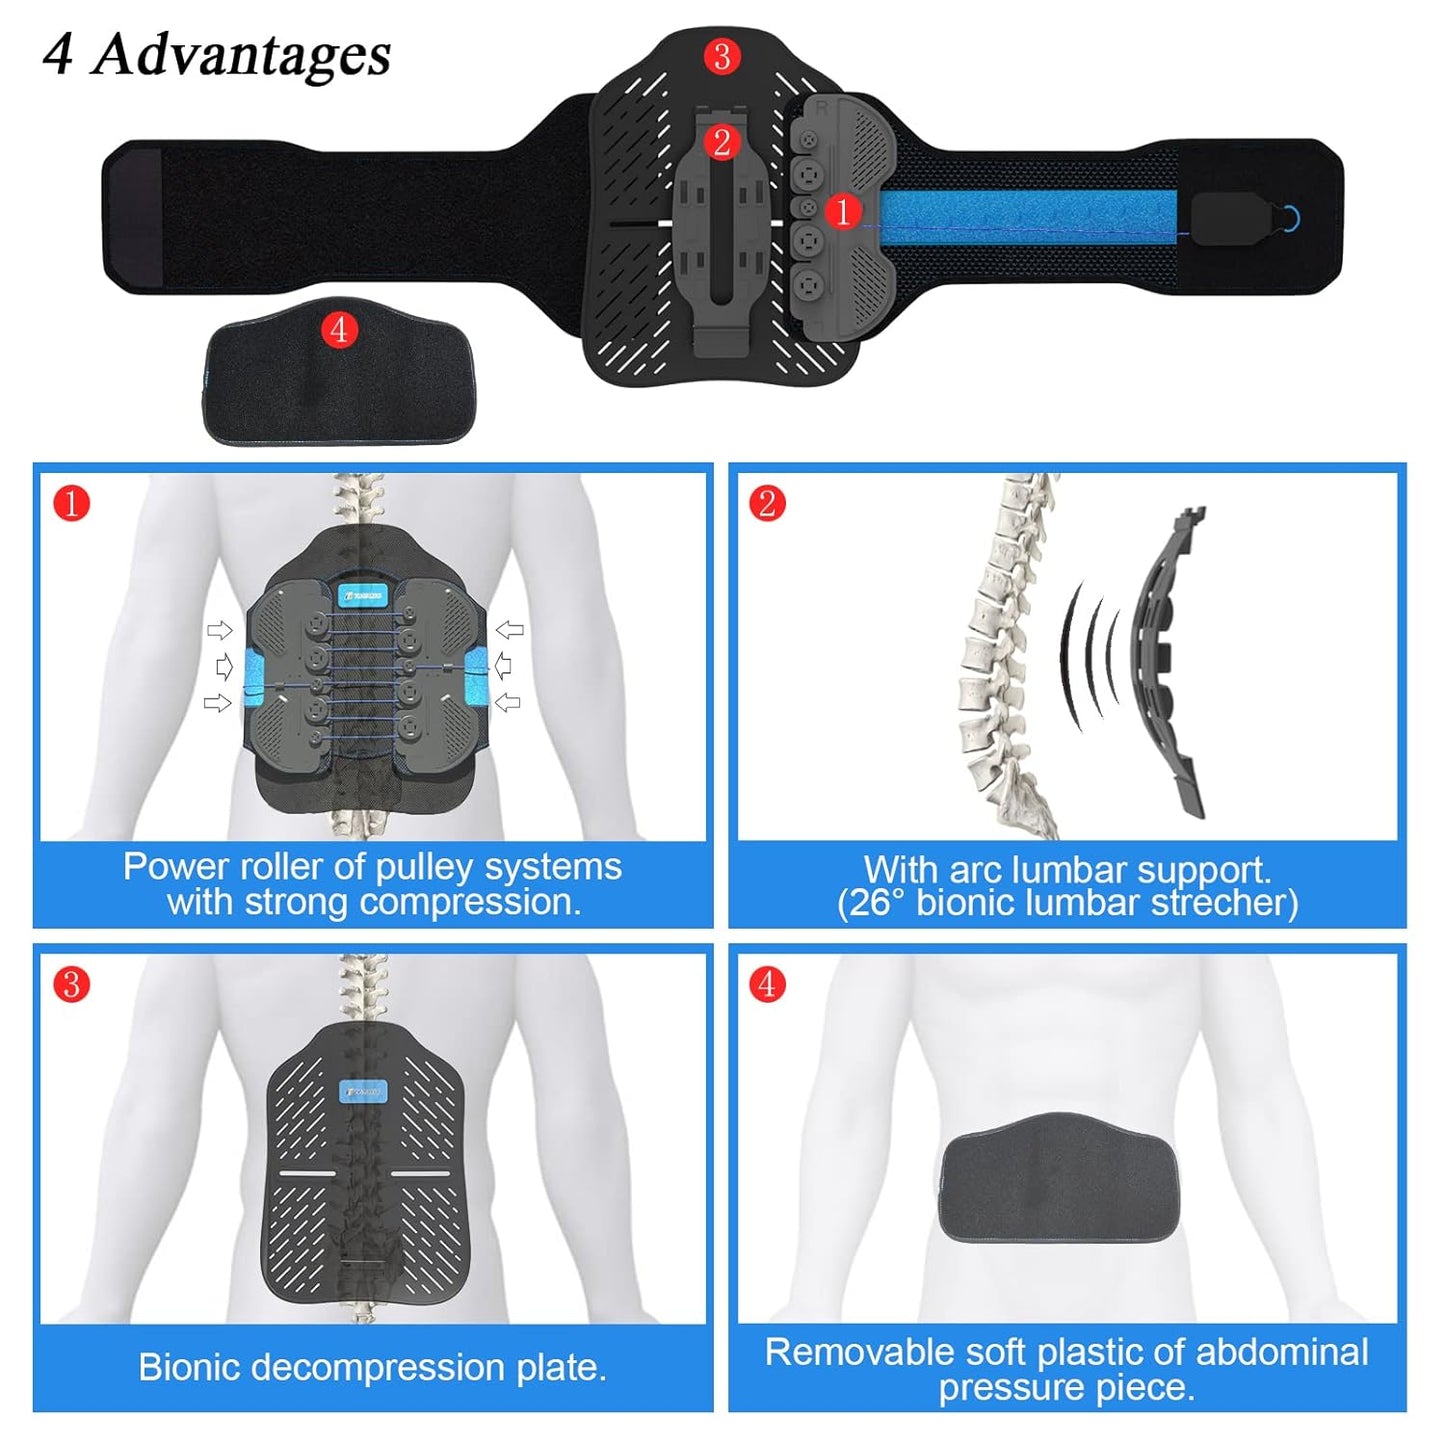 LSO Back Brace with Maximum Decompression Plate & Adjustable Arch Back Support,Pulley System Lumbar Support Belt for Herniated Disc Pain Relief,Spine Stenosis,Sciatica,Scoliosis (Blue, L/XL)